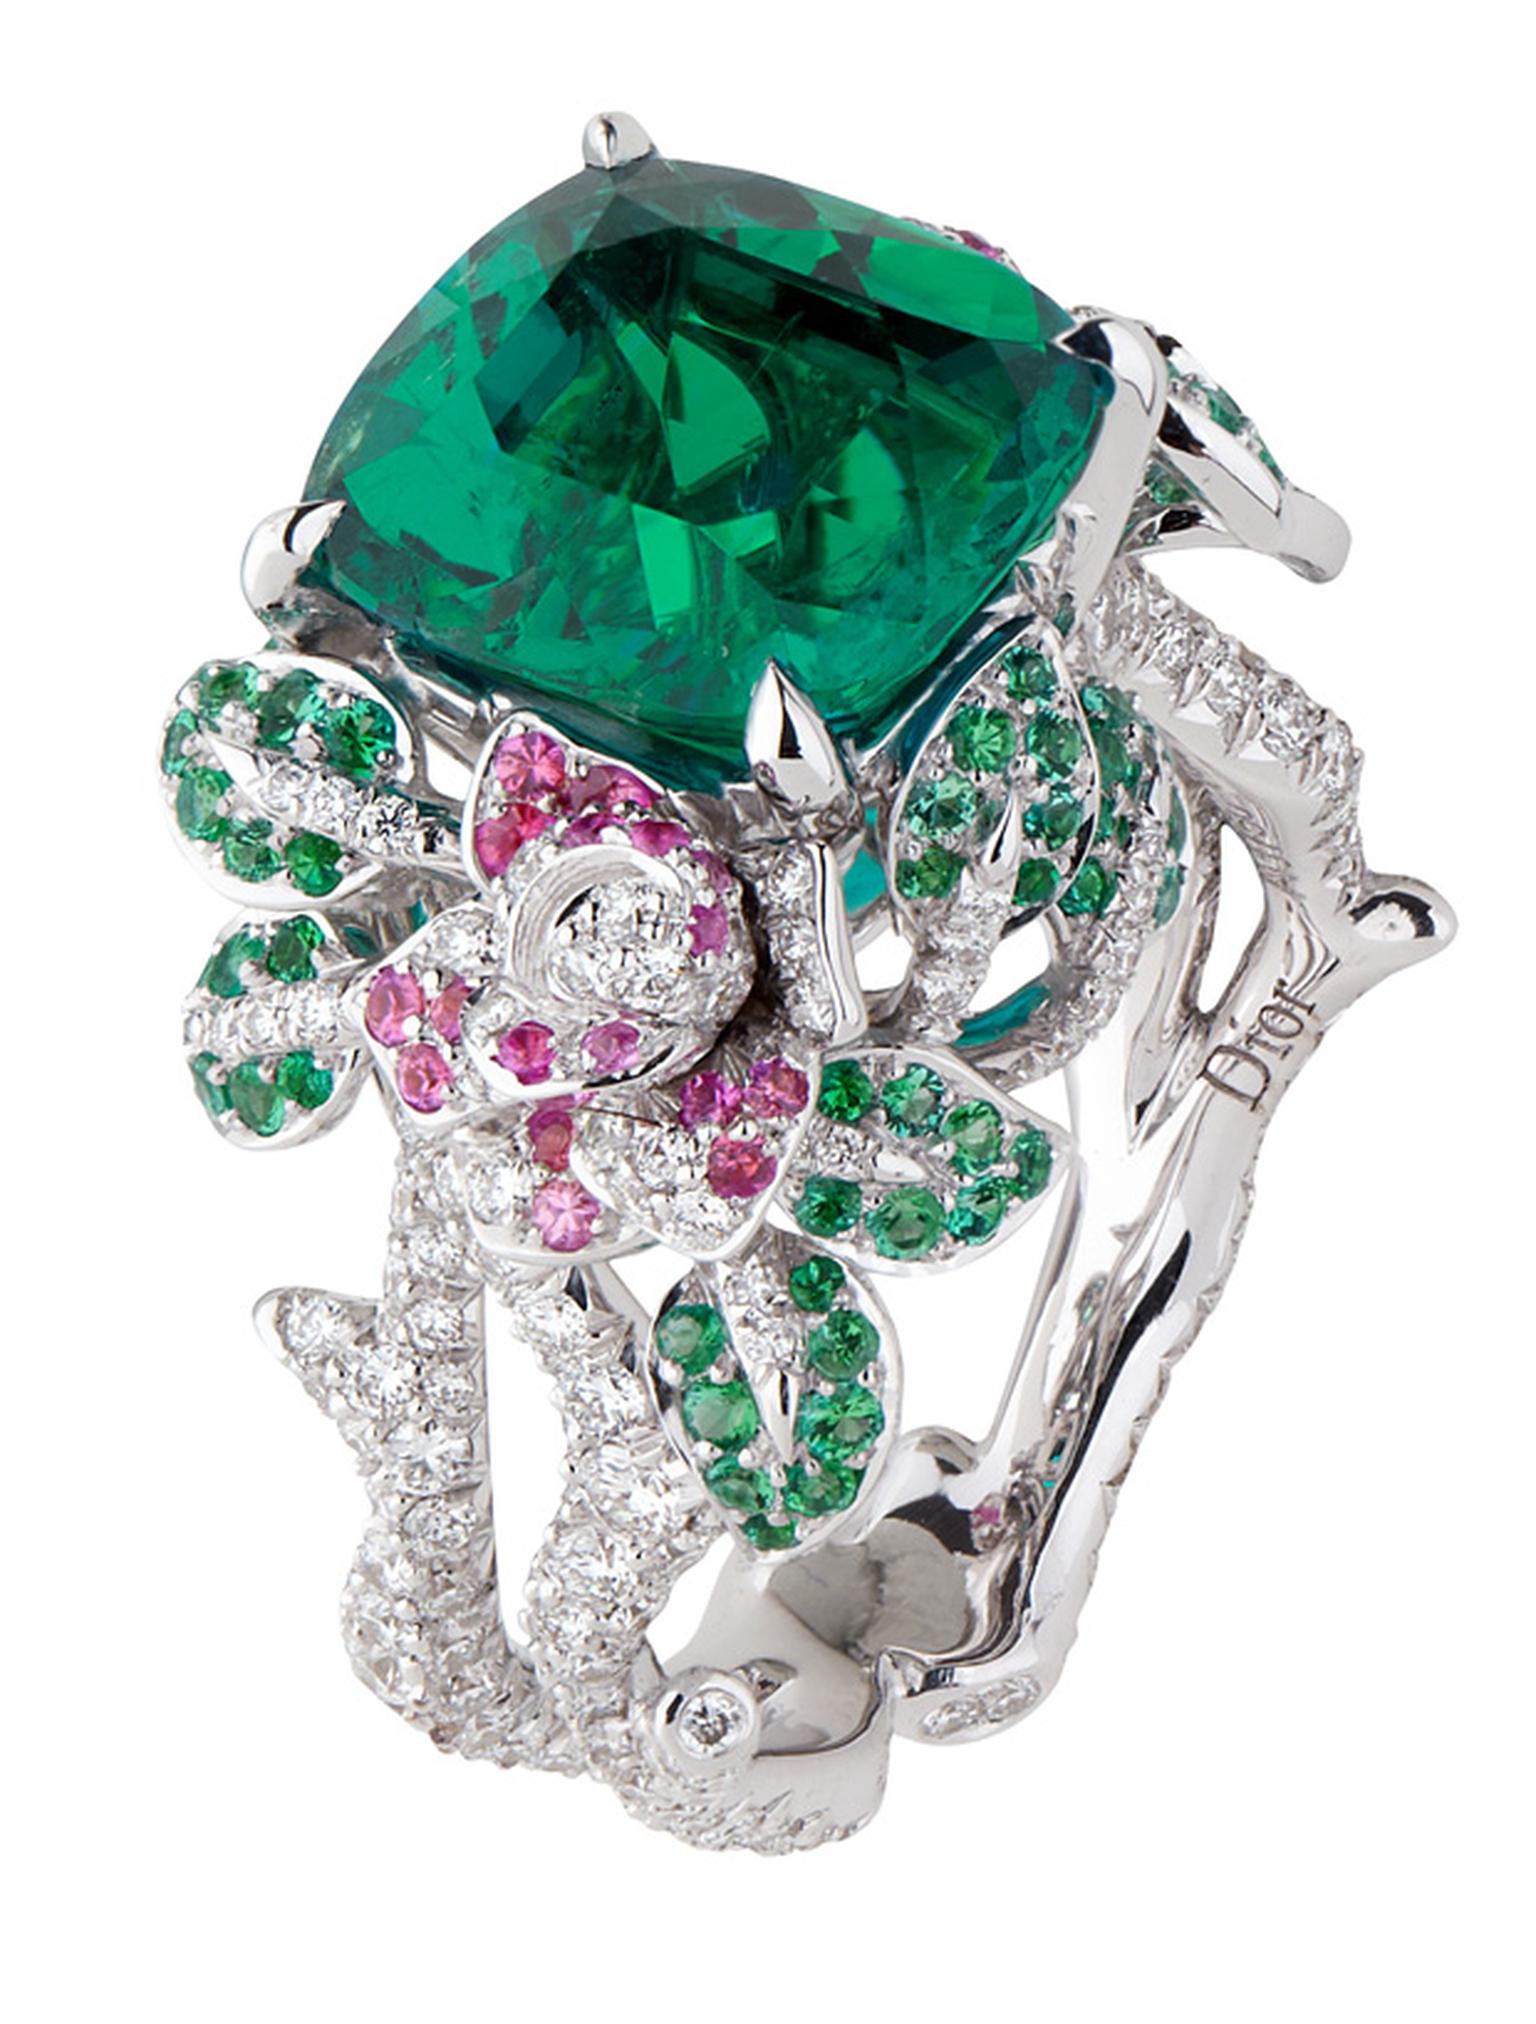 Dior Précieuse Rose ring with emeralds, diamonds and pink sapphires